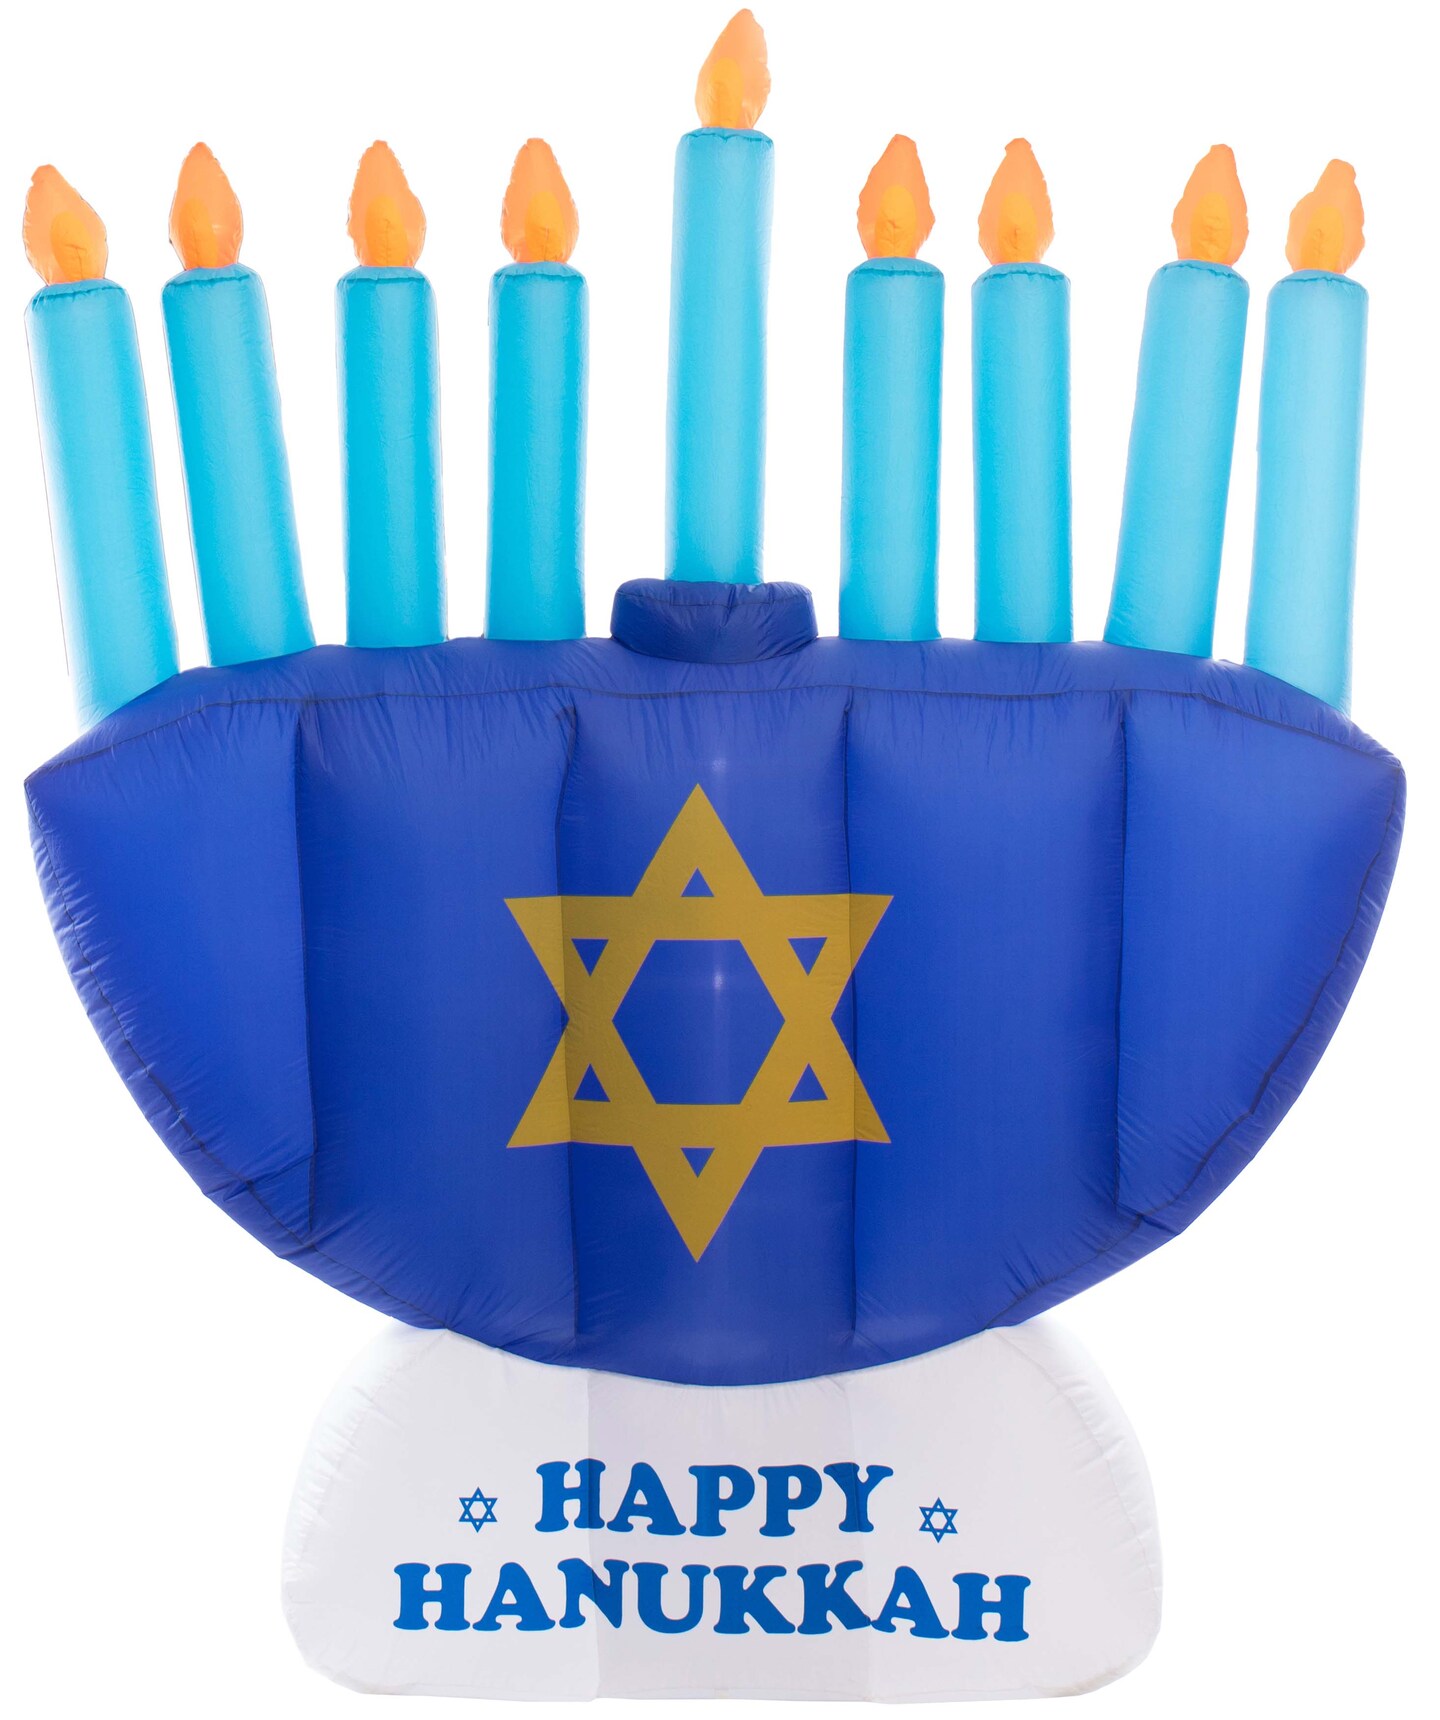 Giant Hanukkah Inflatable Menorah - Yard Decor with Built-in Bulbs, Tie-Down Points, and Powerful Built in Fan